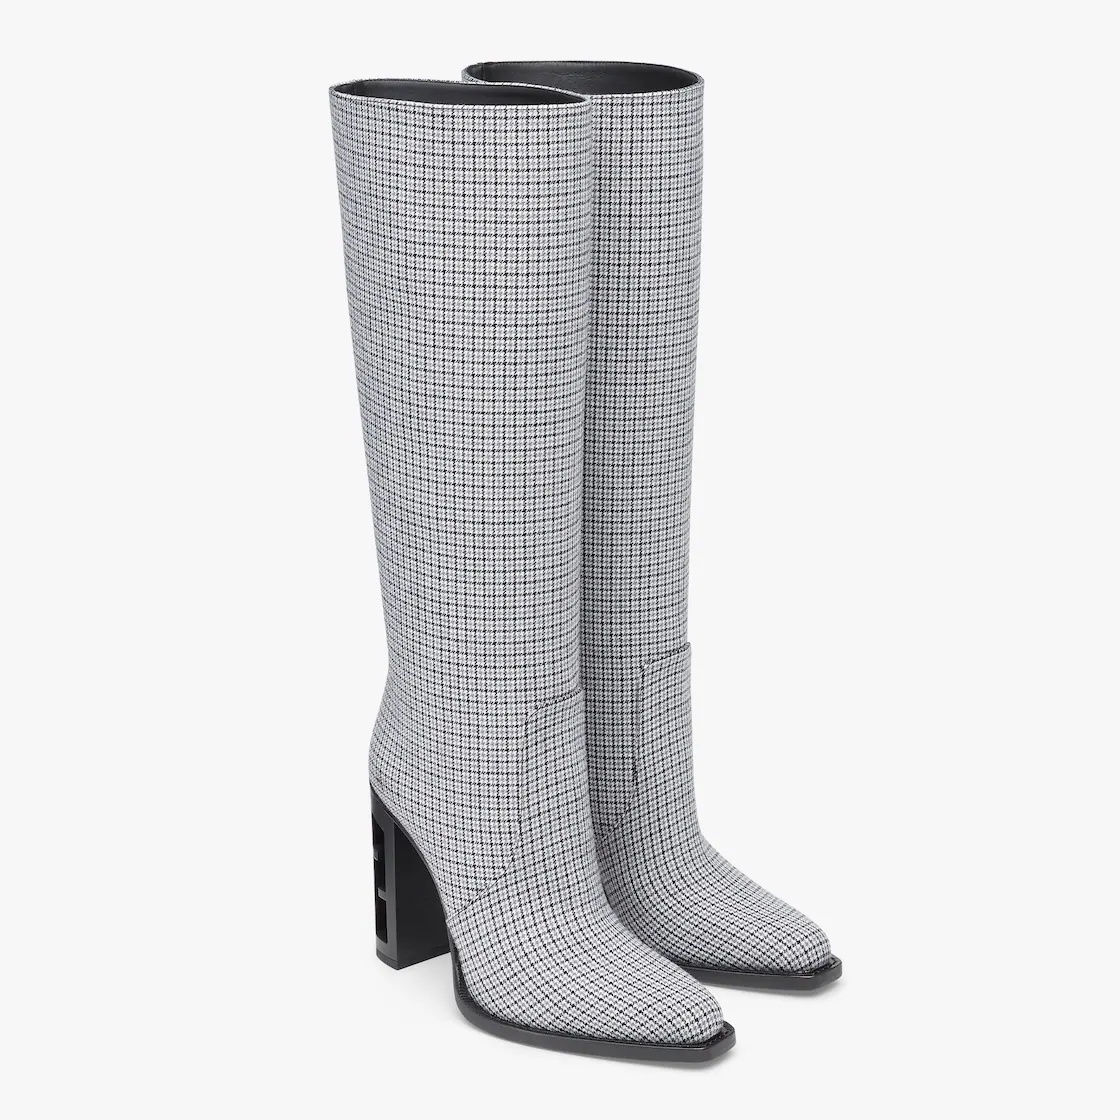 High-heeled boots in gray fabric - 4